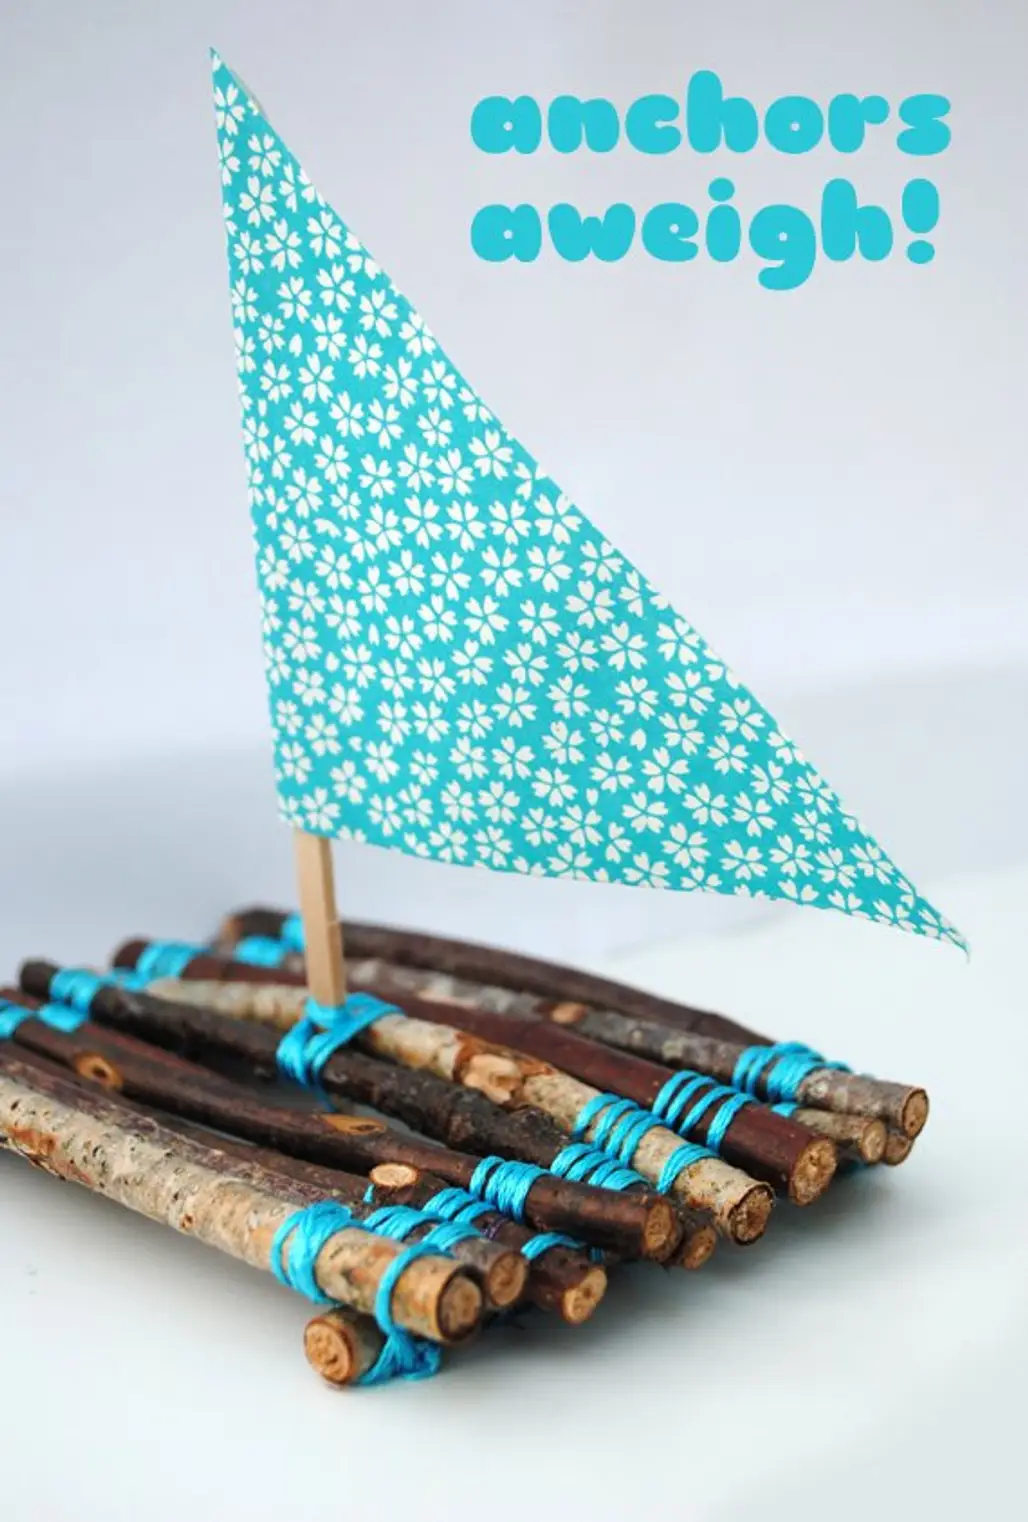 7 Adorable Sailboat Craft Projects That You Can Make